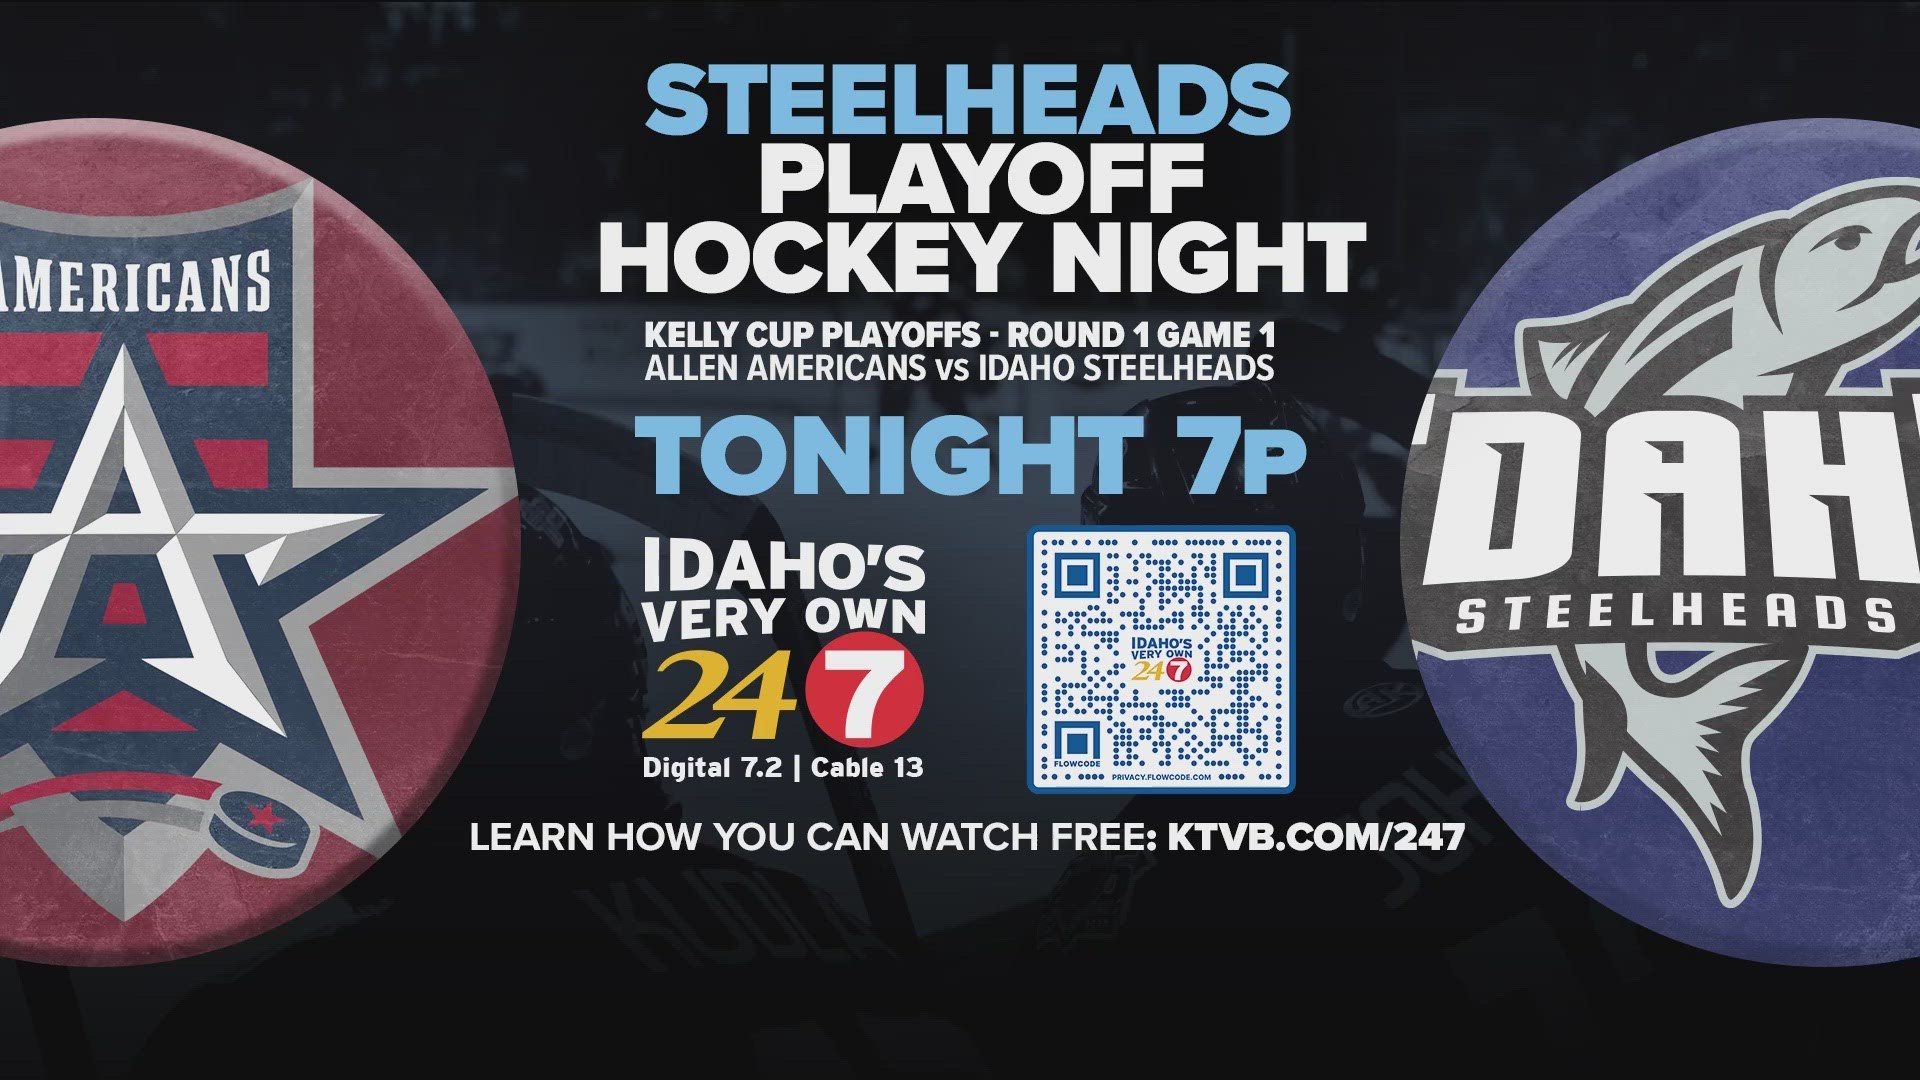 Idaho welcomes Allen to downtown Boise on Monday for Game 1 of the Mountain Division Semifinals. The Steelheads eye a second-straight trip to the Kelly Cup Finals.